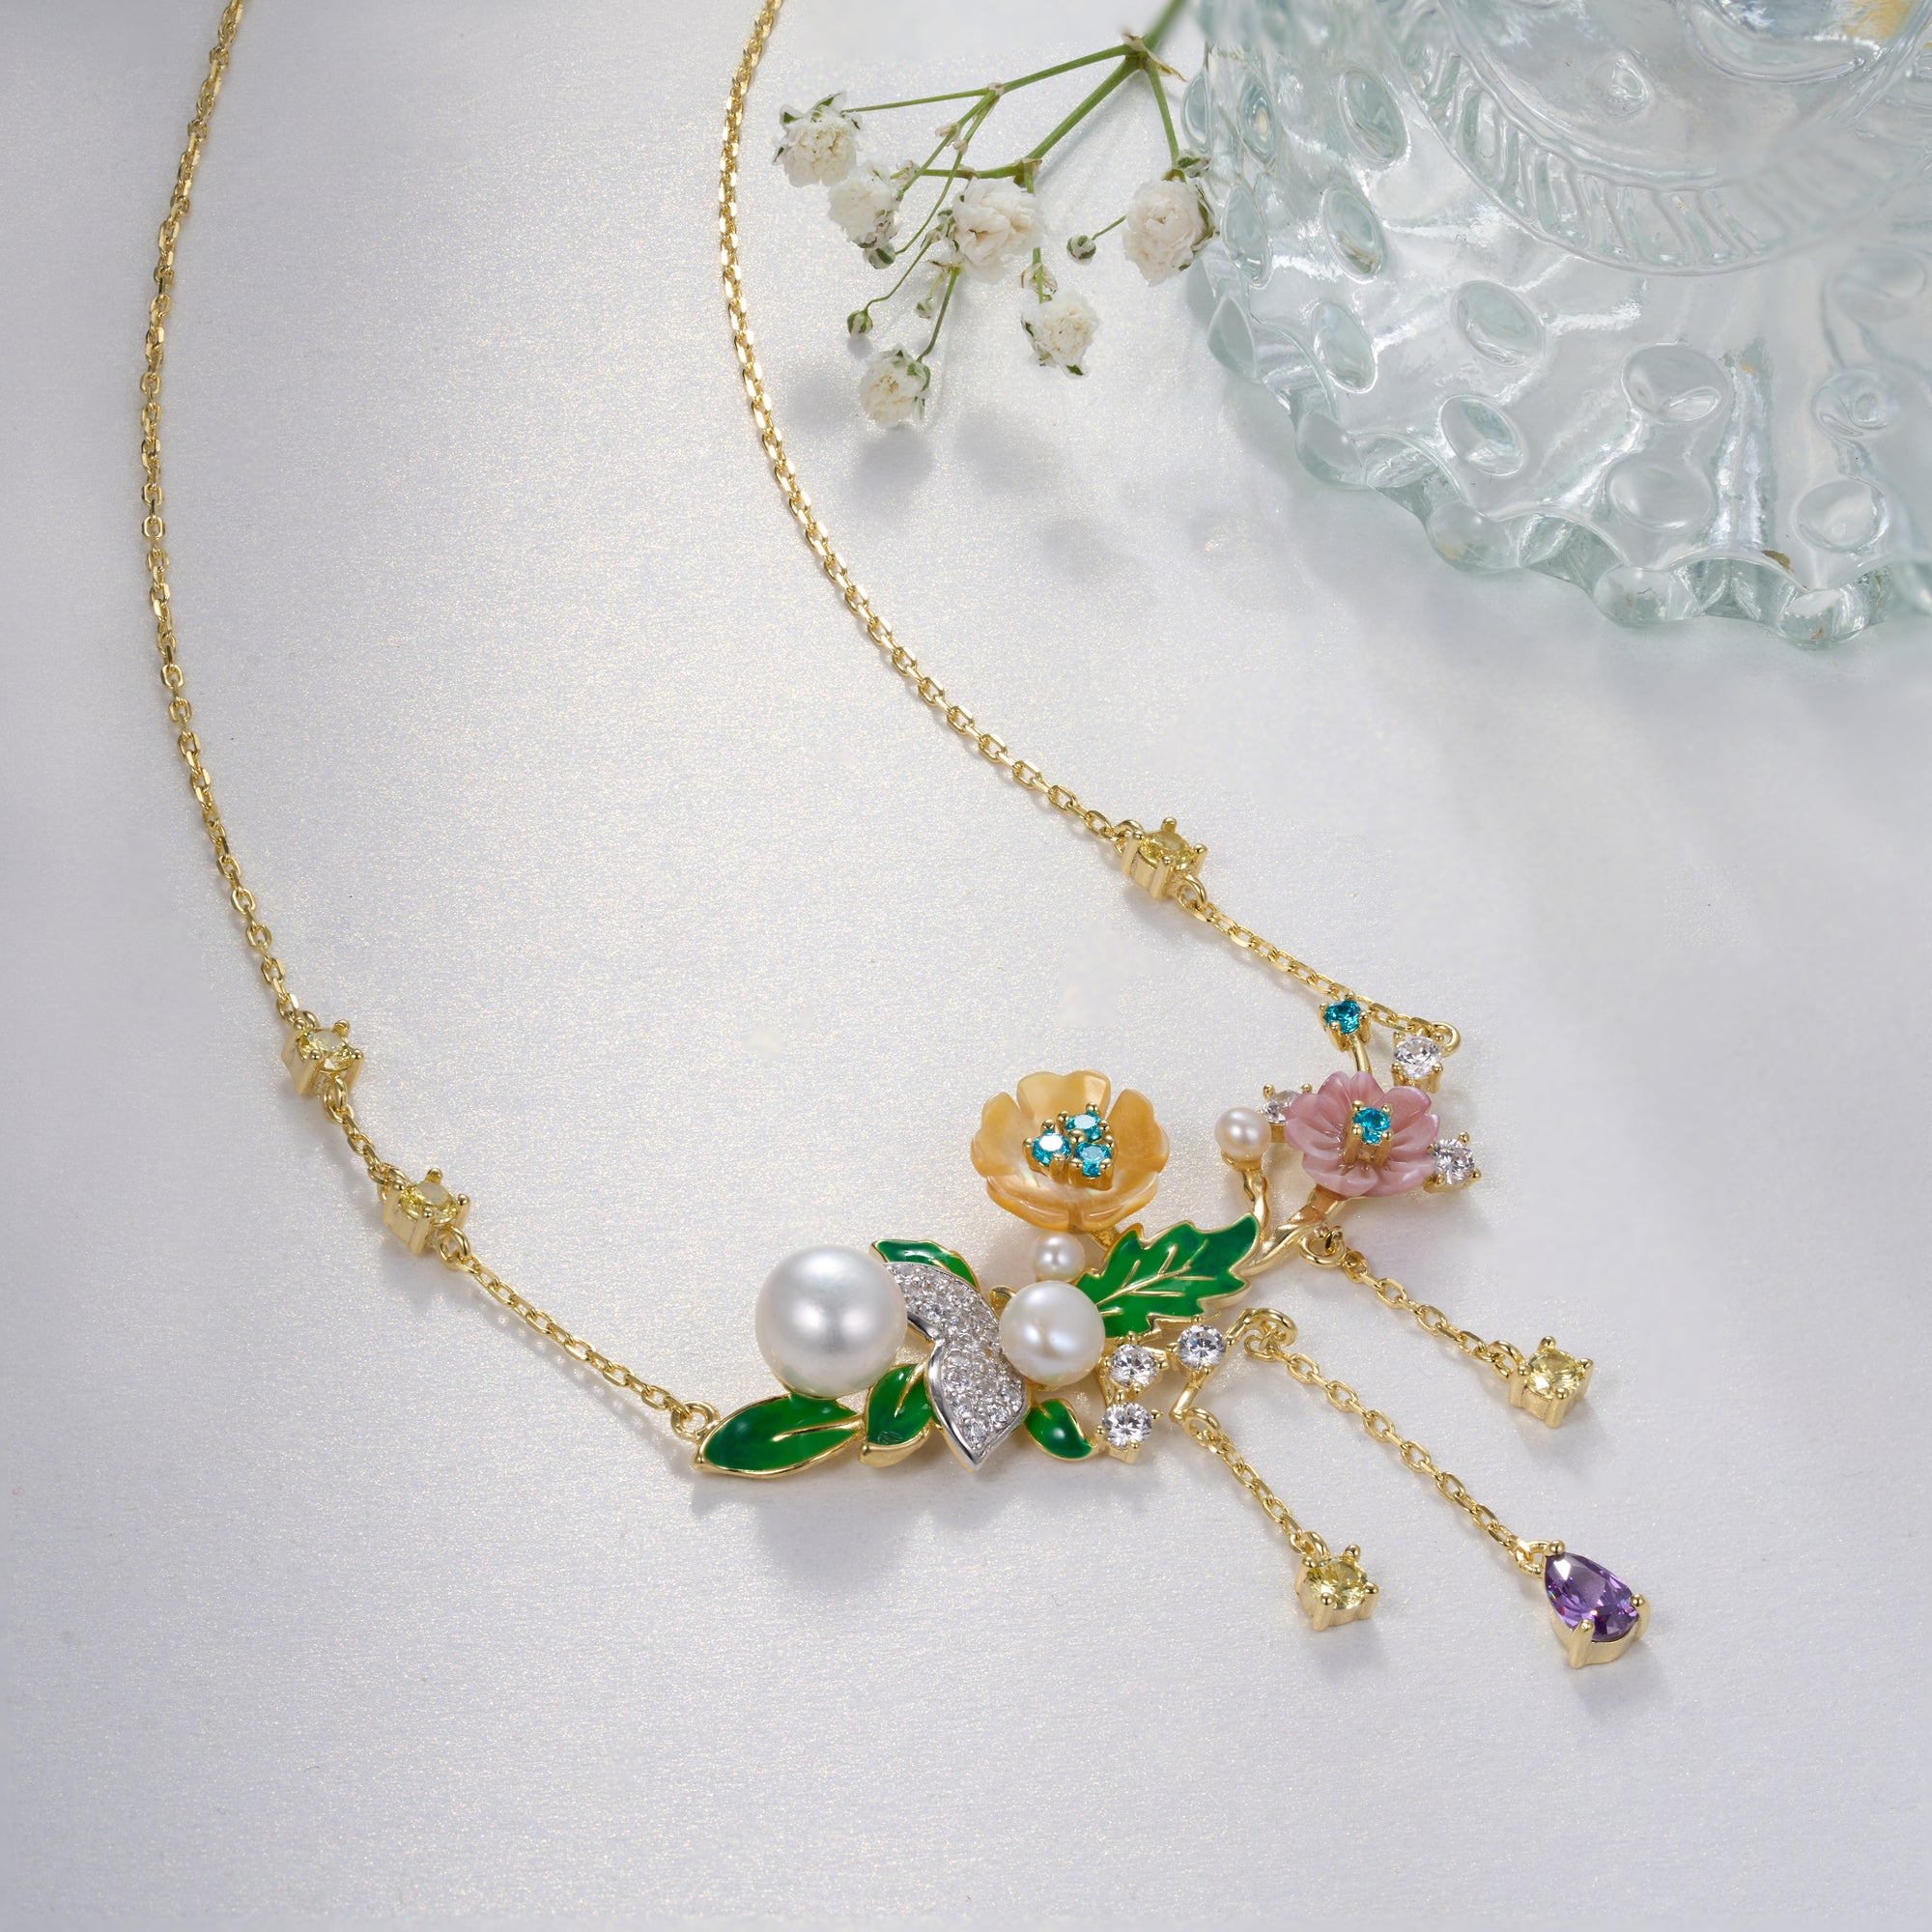 A gold plated necklace with pearls, green stones, yellow, purple, pink shell flowers and a bird charm.